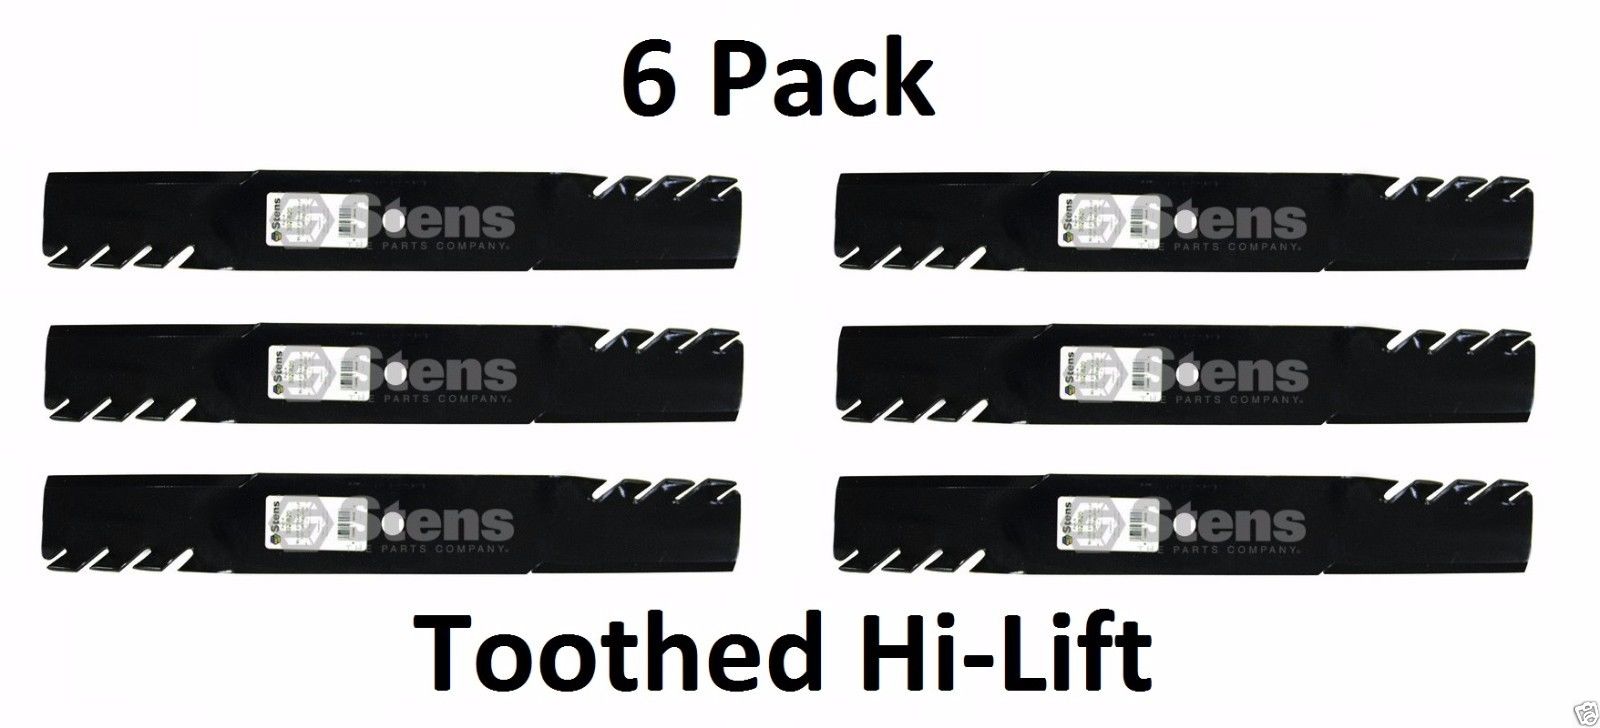 6 Stens 302-820 Toothed Hi-Lift Blades For Gravely 46999 08898900 08899100 48864